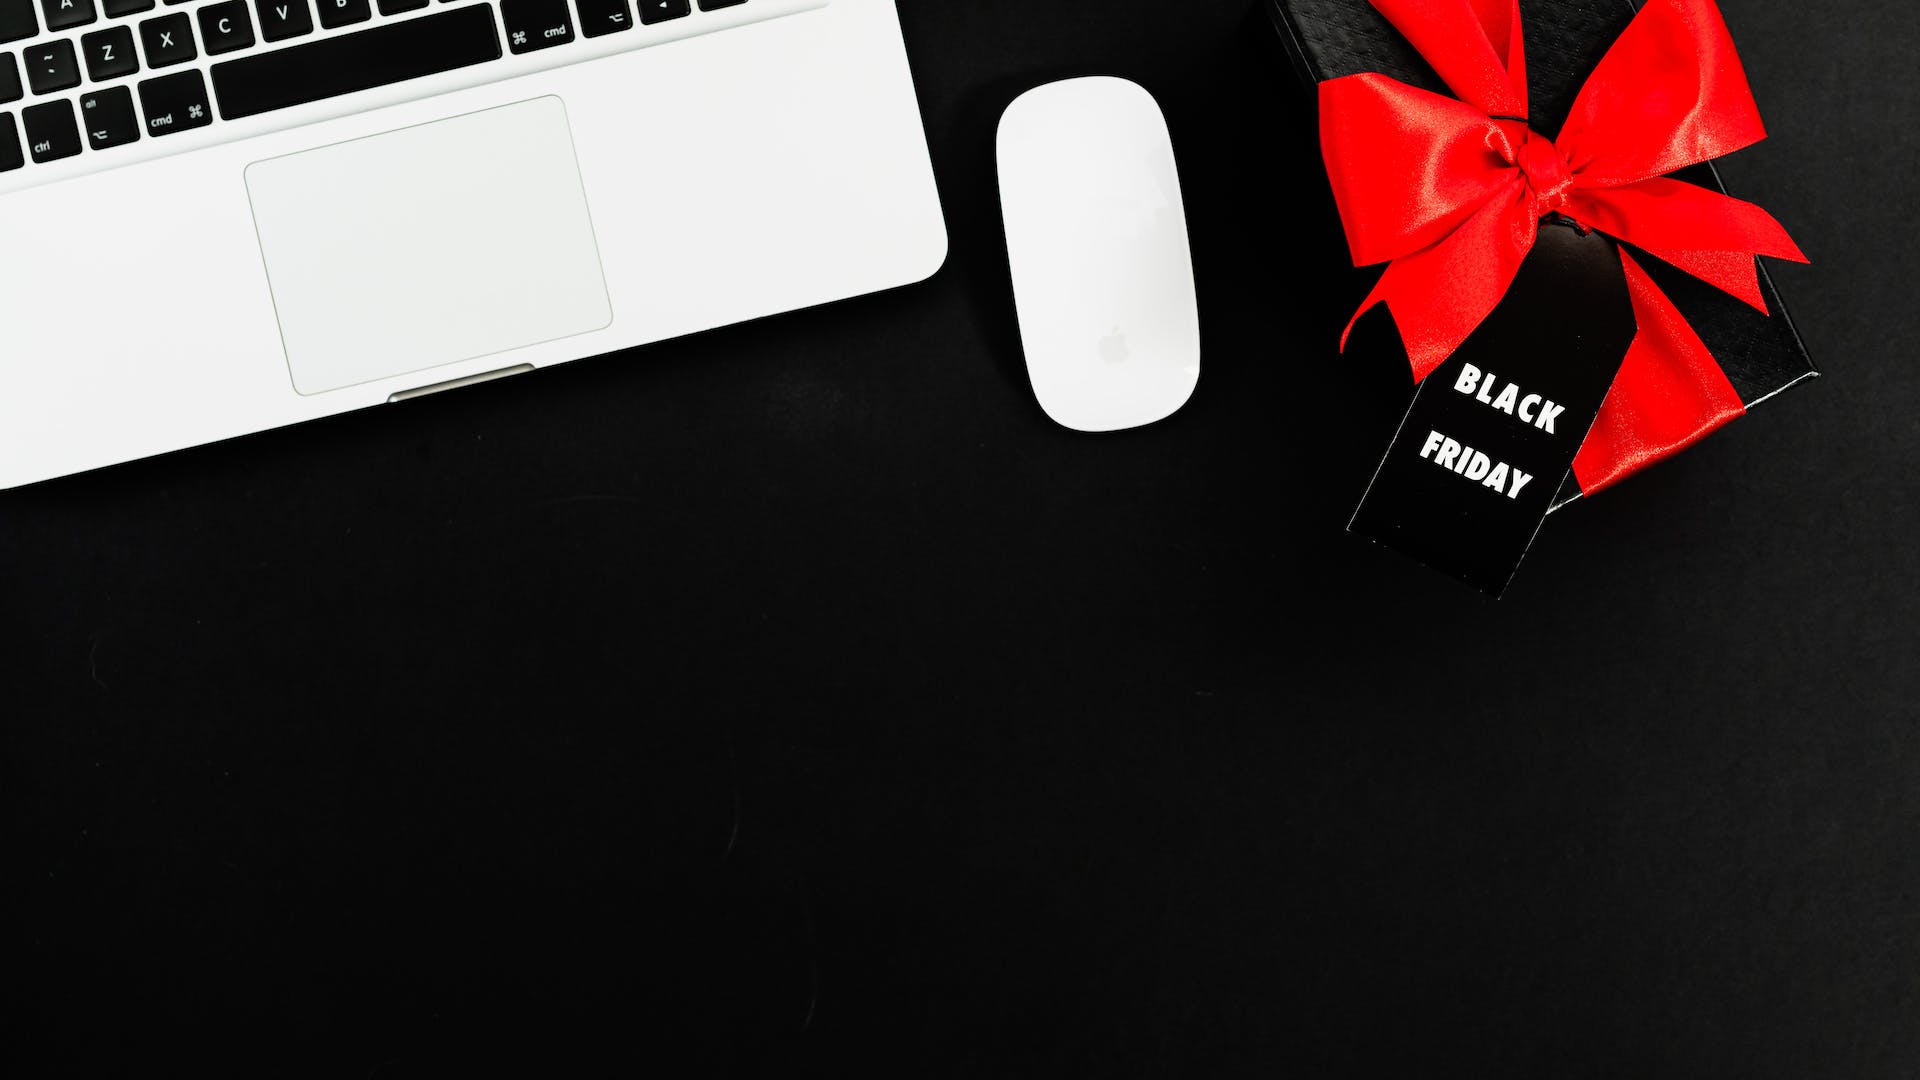 gift with black friday tag next to a laptop and mouse reflecting importance of black friday to hoteliers and the need to identify best practices for success